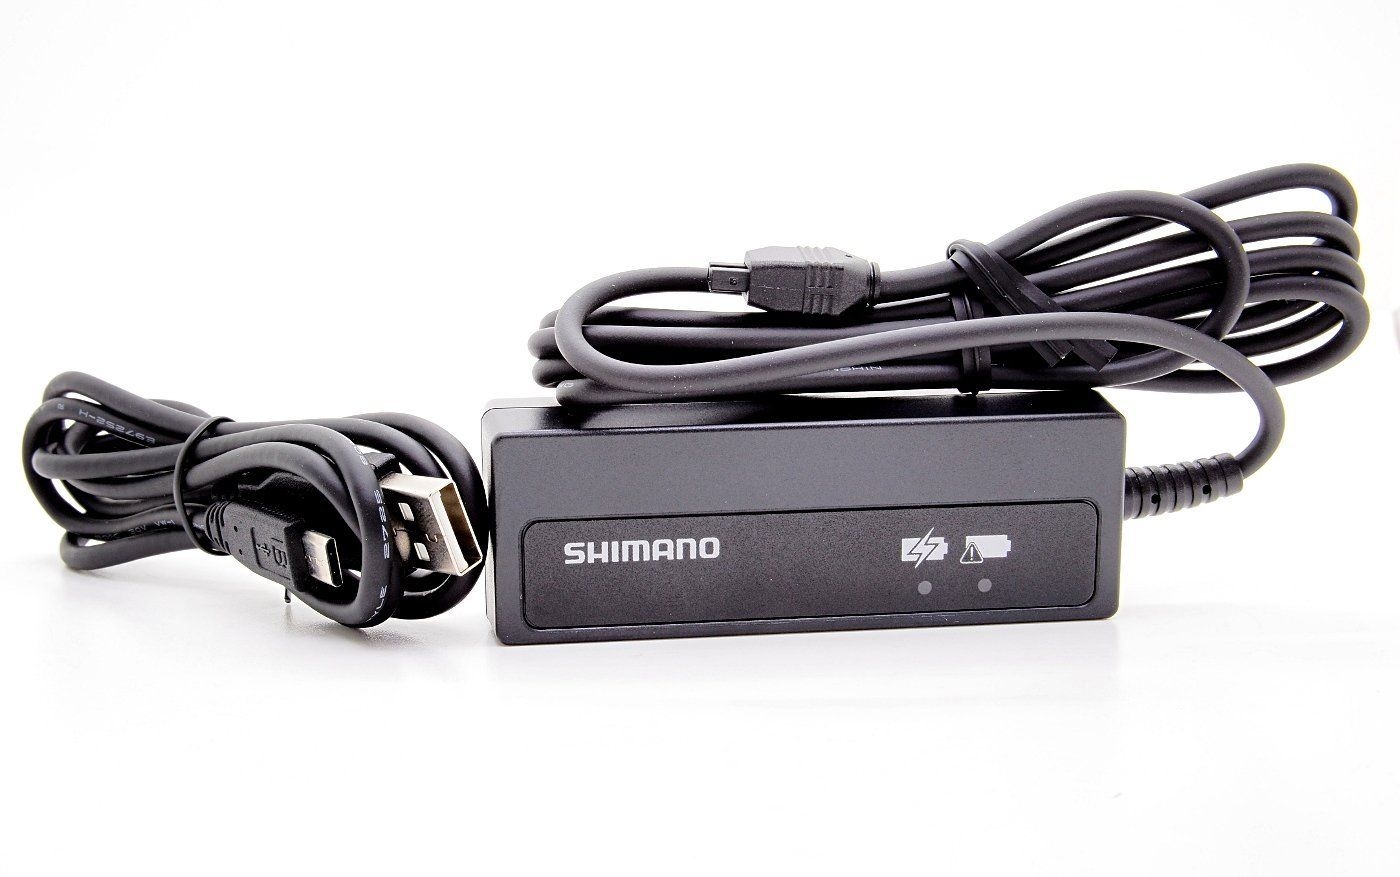 Shimano Di2 SM-BCR2 Internal Battery Charger/ PC Link,